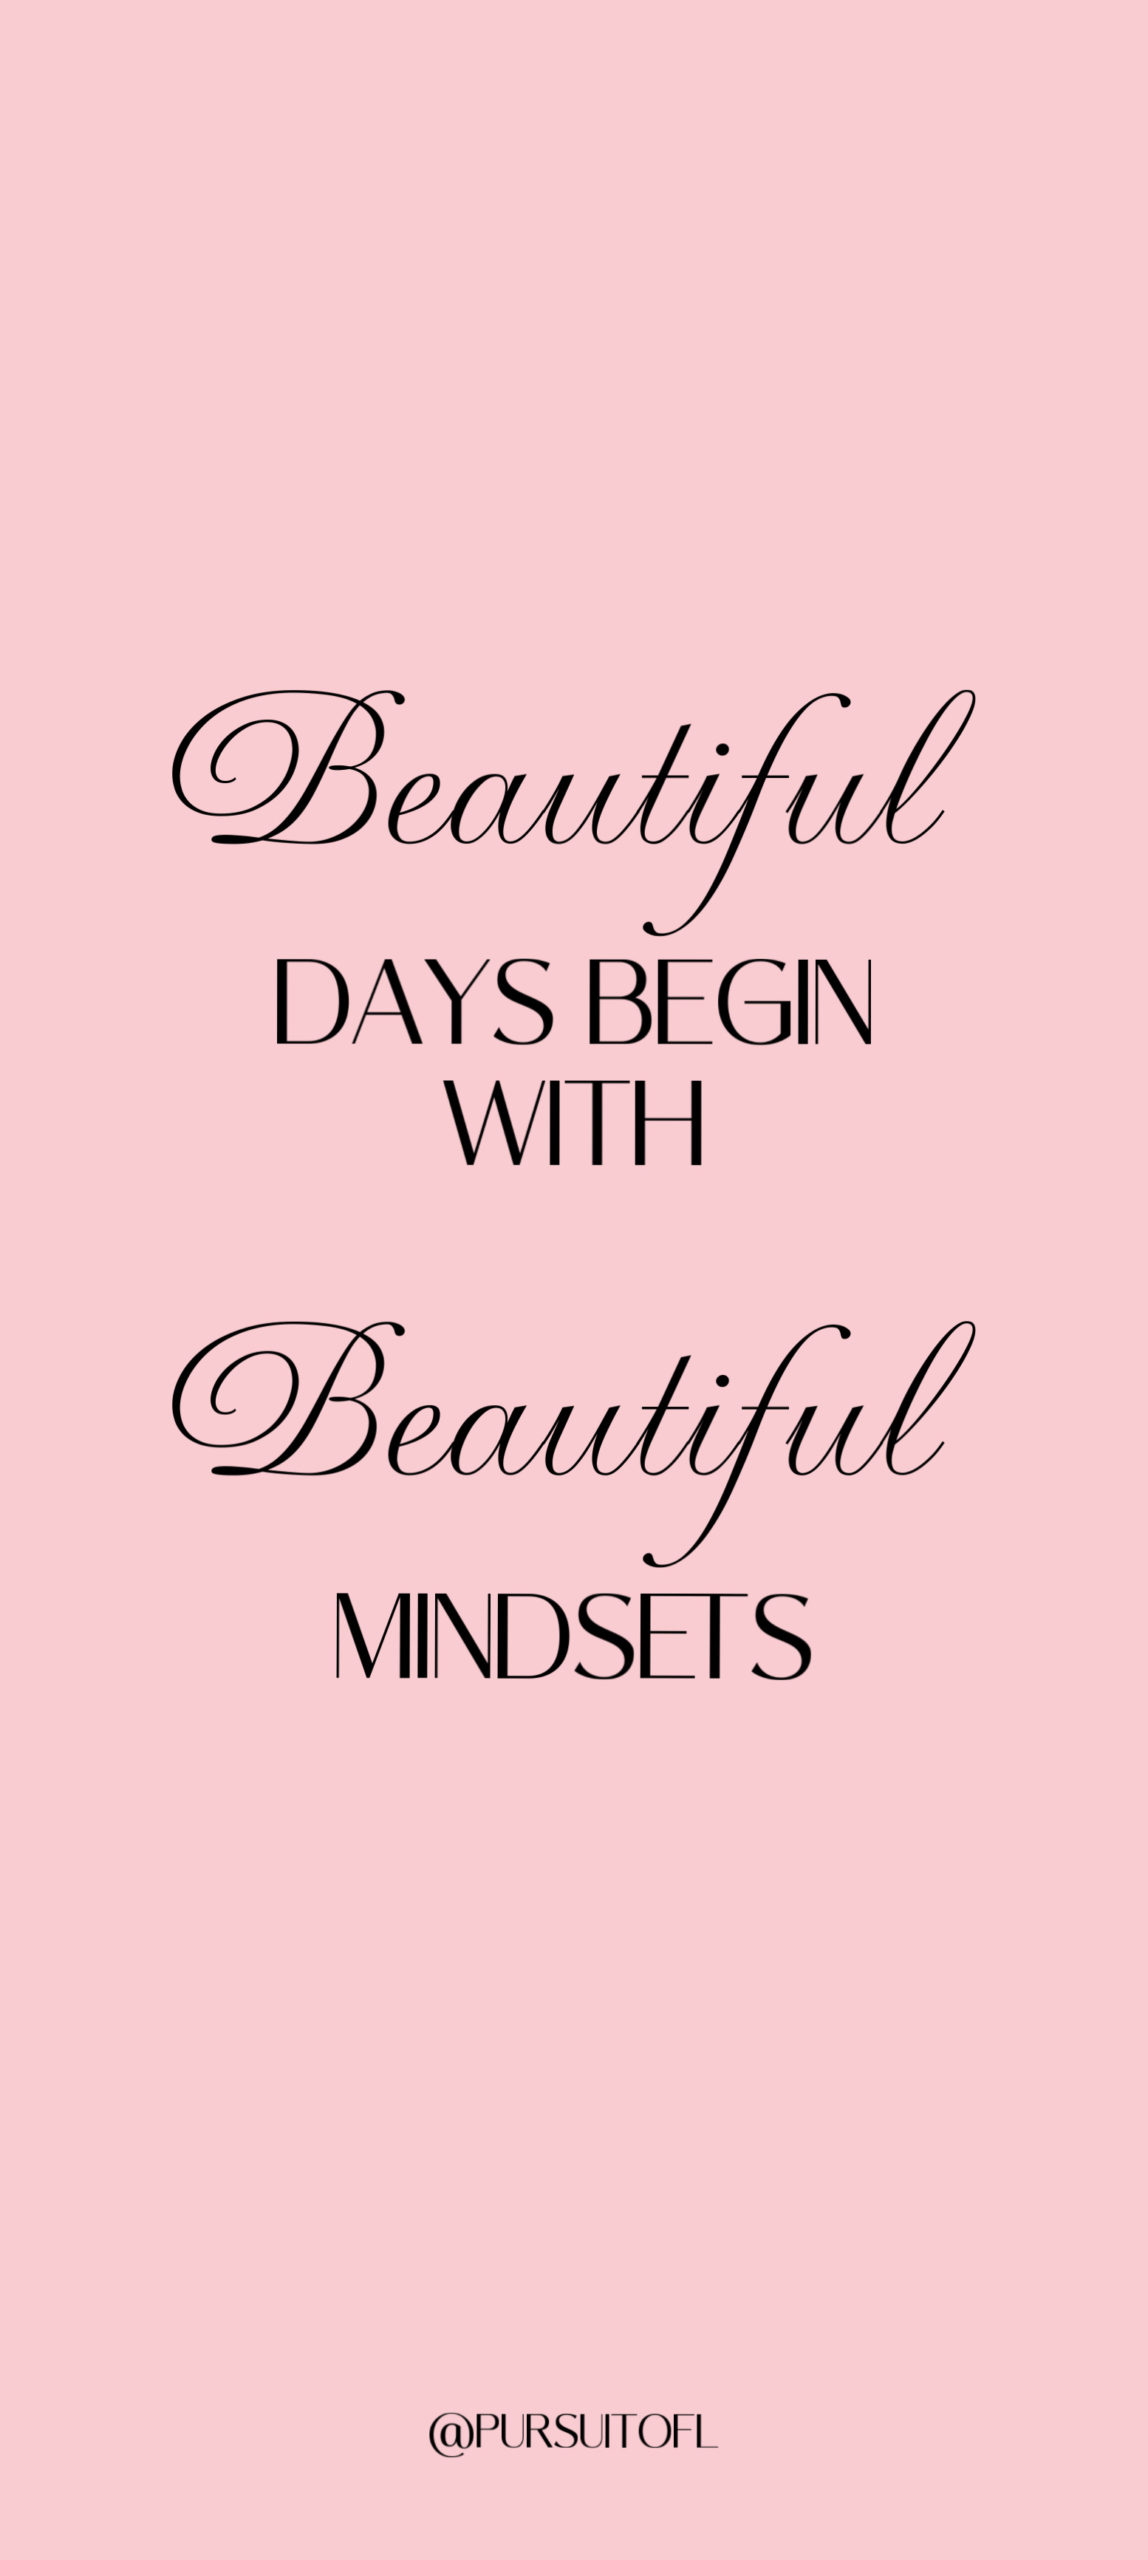 Pink phone wallpaper with beautiful mindset motivational quote.